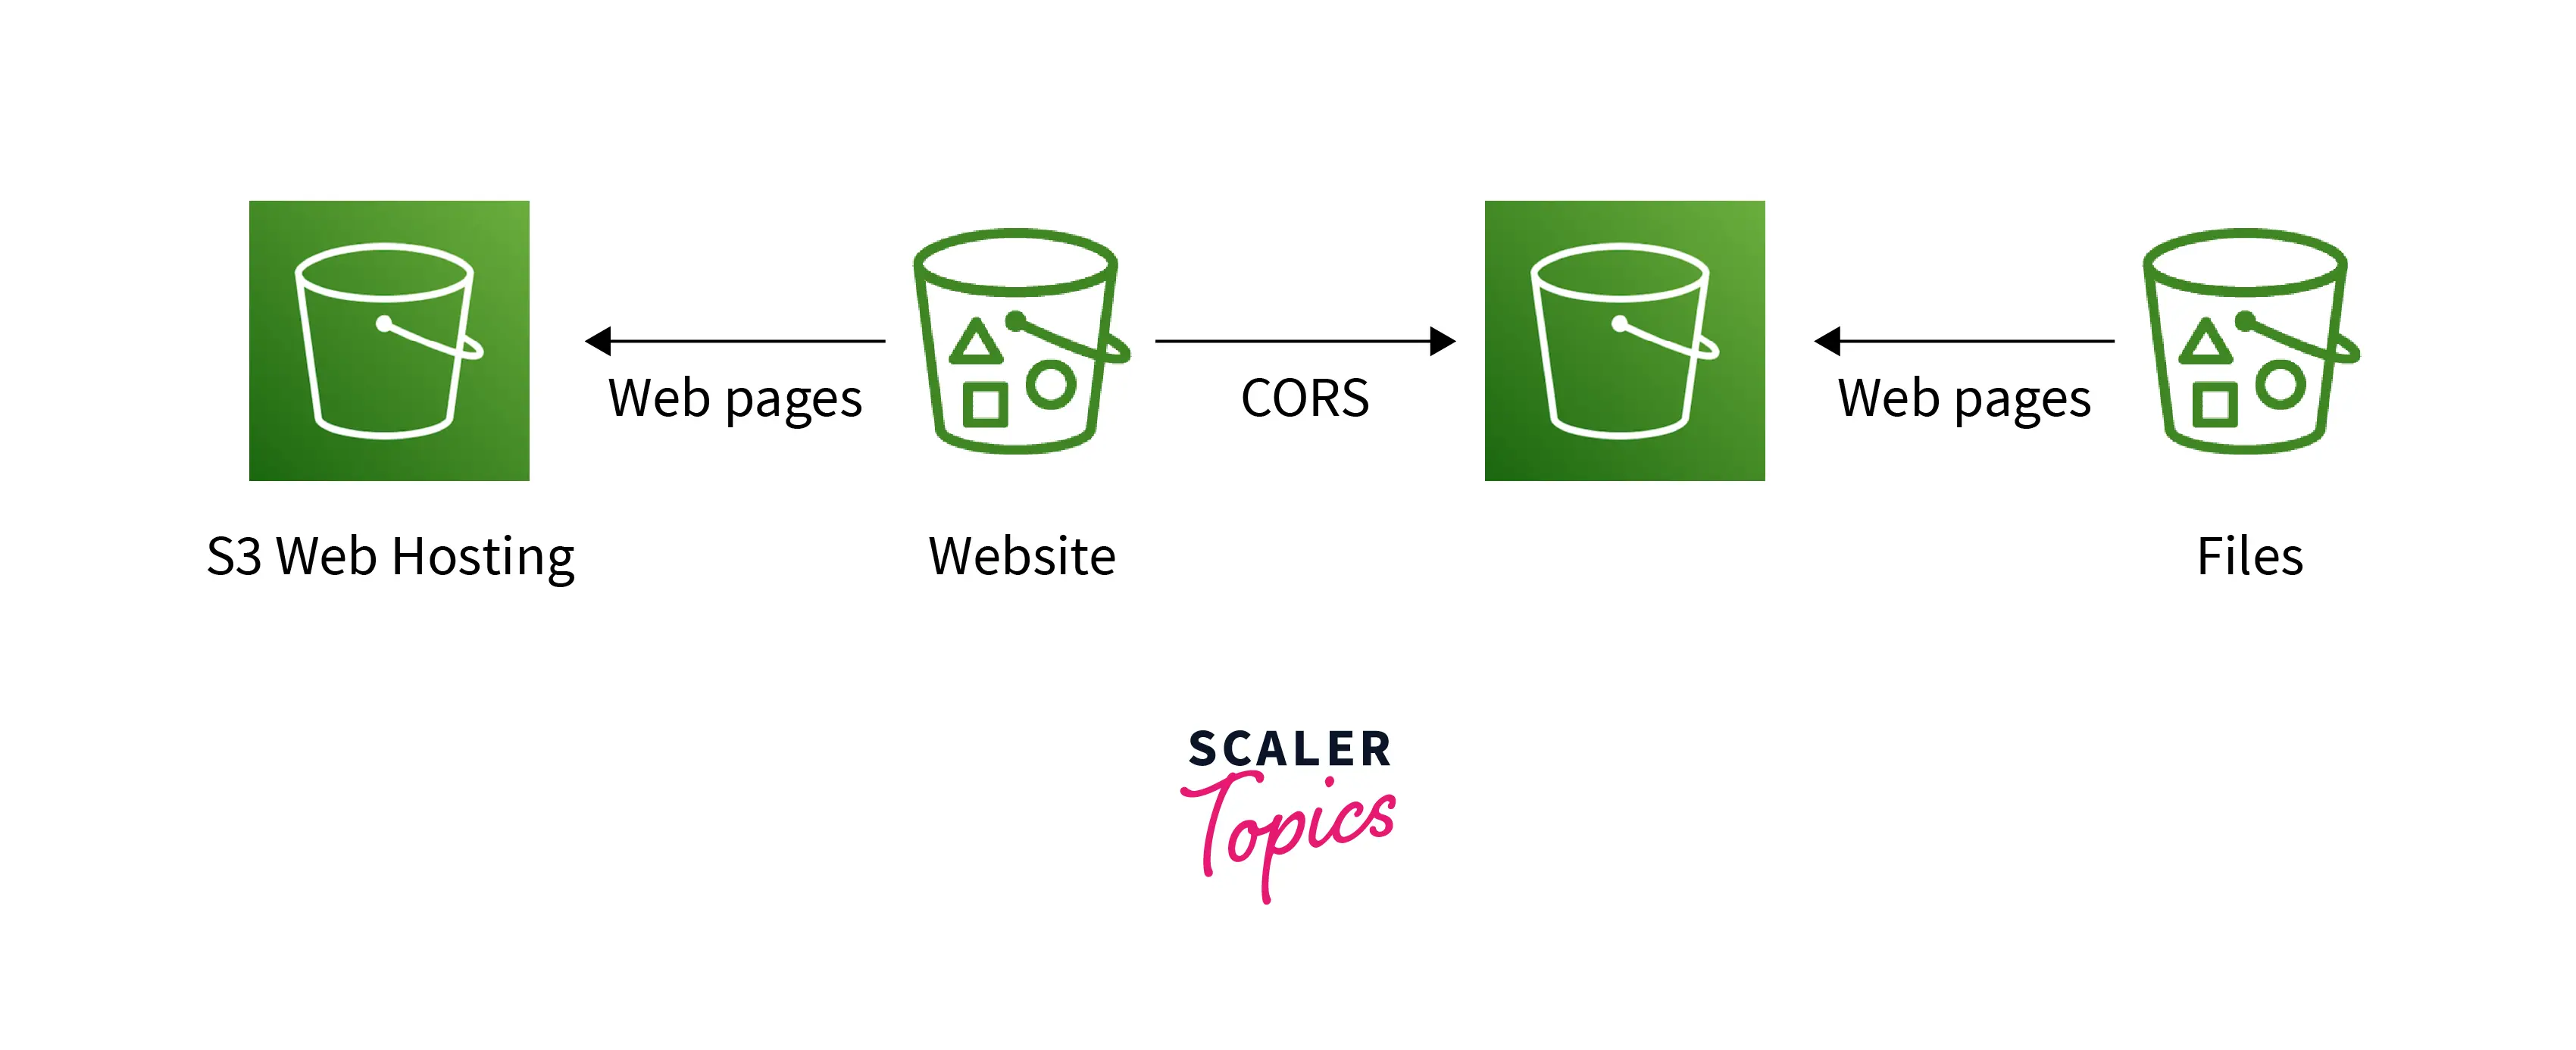 Example Use Cases of CORS in S3